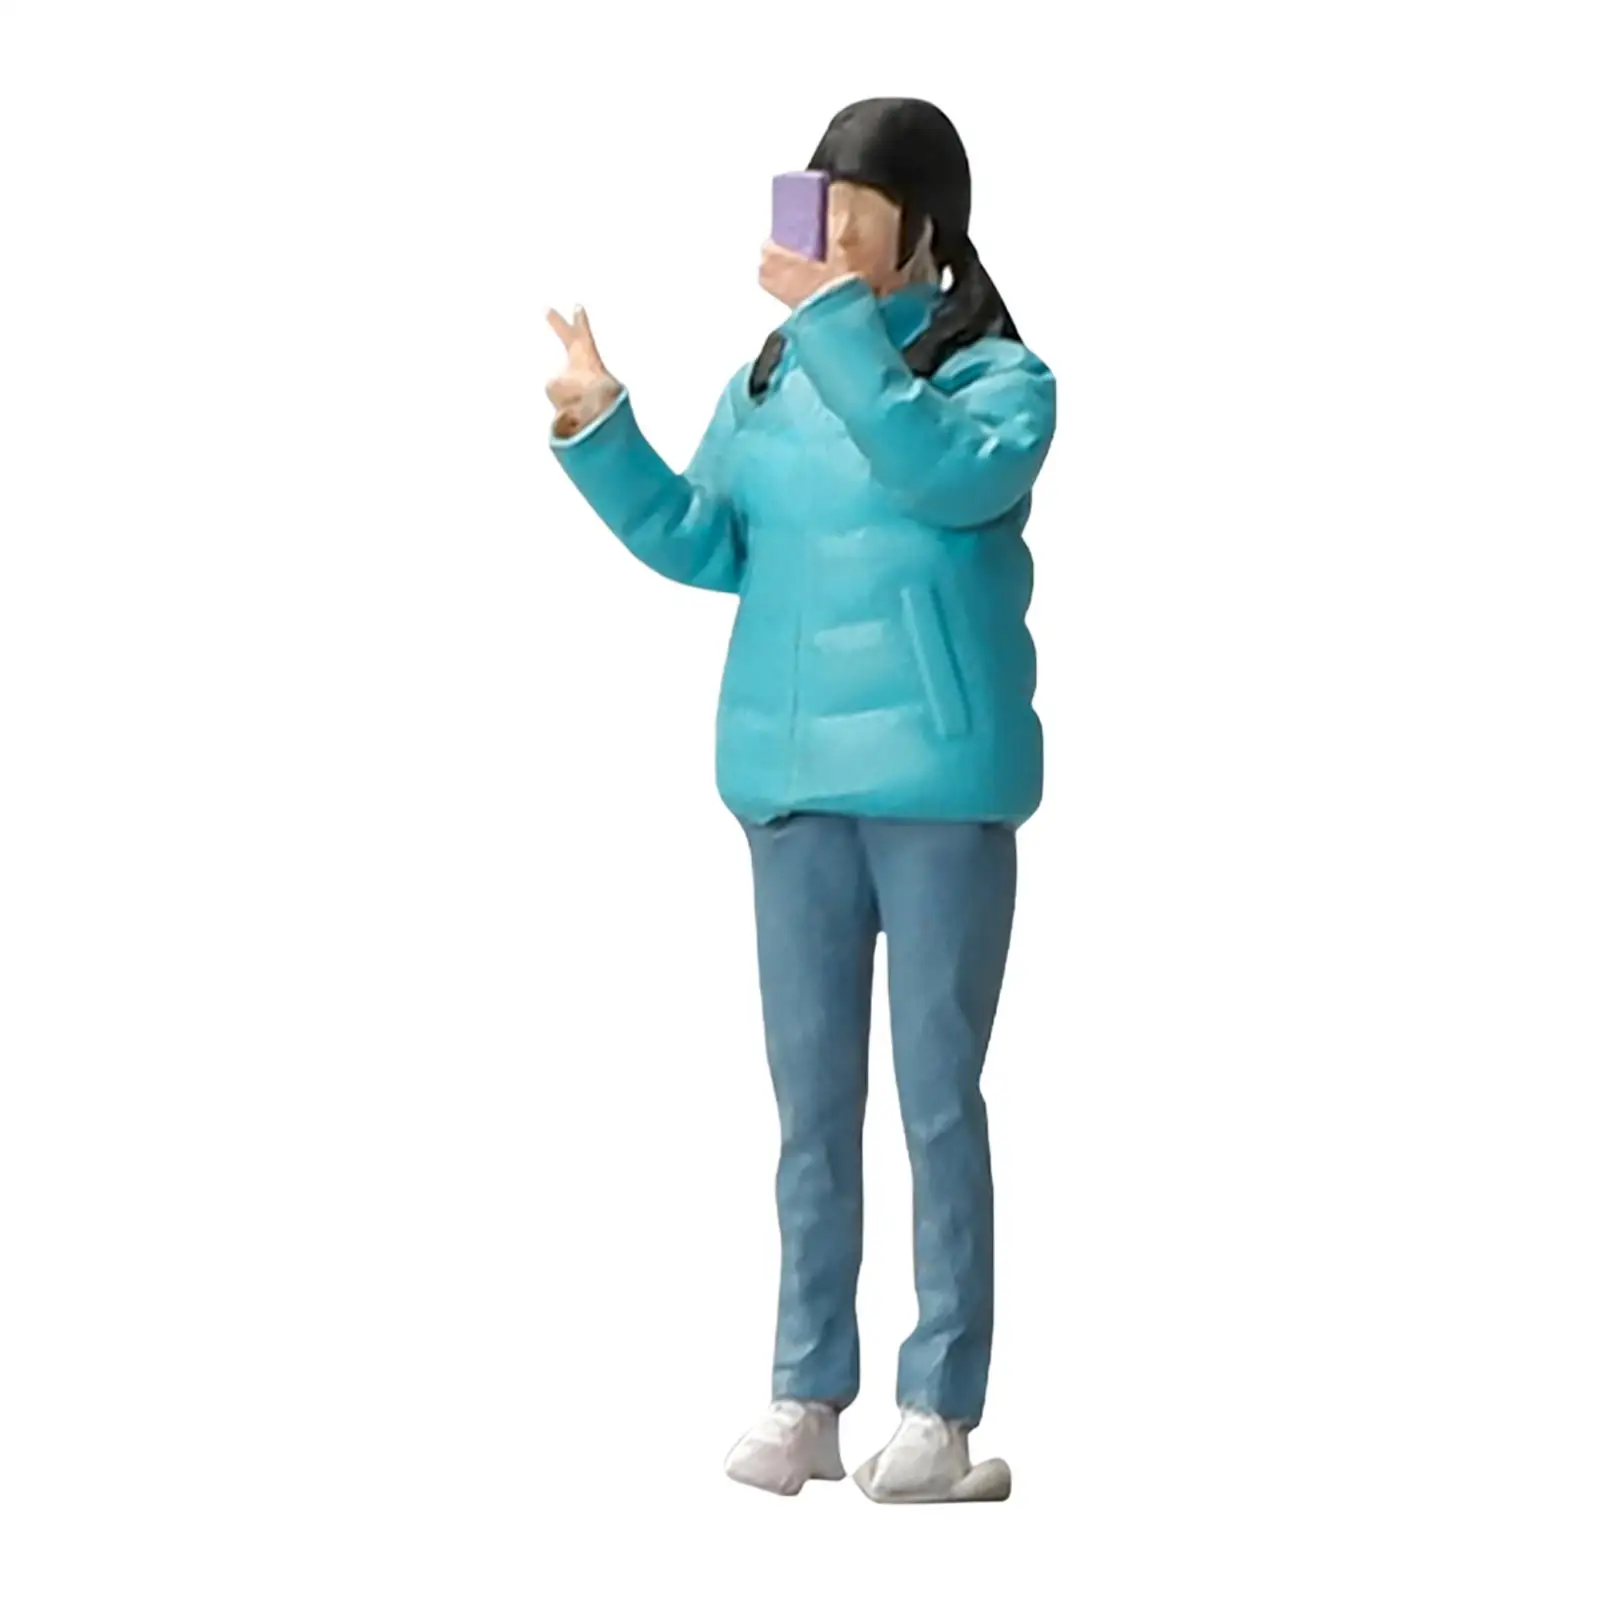 1:64 People Figures Down Jacket Girl for Diorama Scenery Landscape Dollhouse